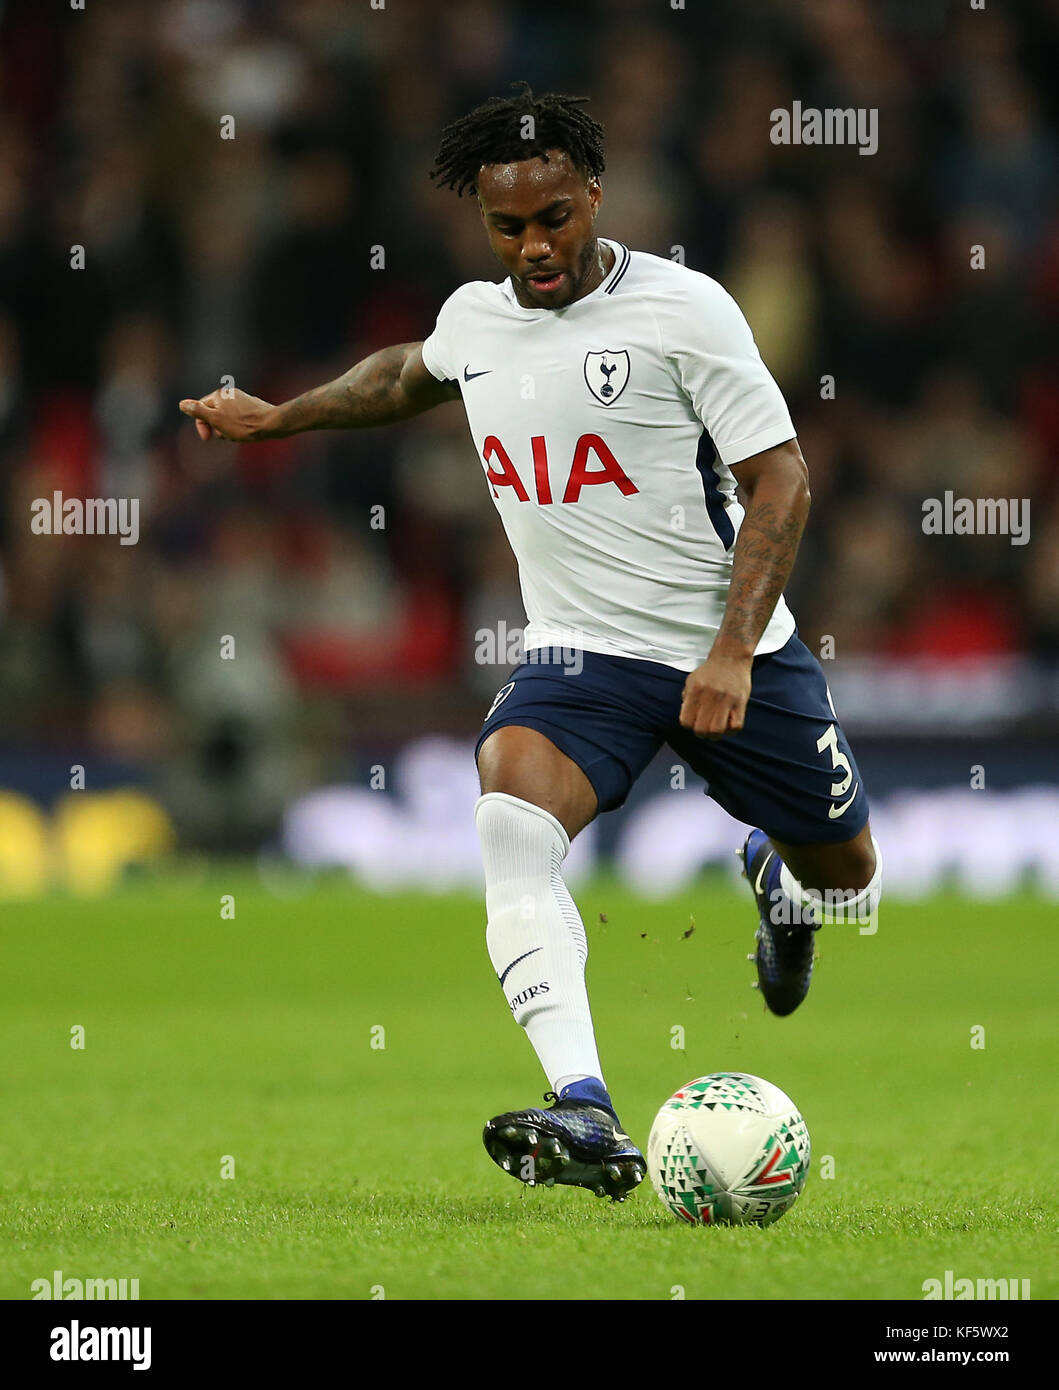 Tottenham Hotspur's Danny Rose during the Carabao Cup, Fourth Round match at Wembley, London. PRESS ASSOCIATION Photo. Picture date: Wednesday October 25, 2017. See PA story SOCCER Tottenham. Photo credit should read: Steven Paston/PA Wire. RESTRICTIONS: No use with unauthorised audio, video, data, fixture lists, club/league logos or 'live' services. Online in-match use limited to 75 images, no video emulation. No use in betting, games or single club/league/player publications. Stock Photo